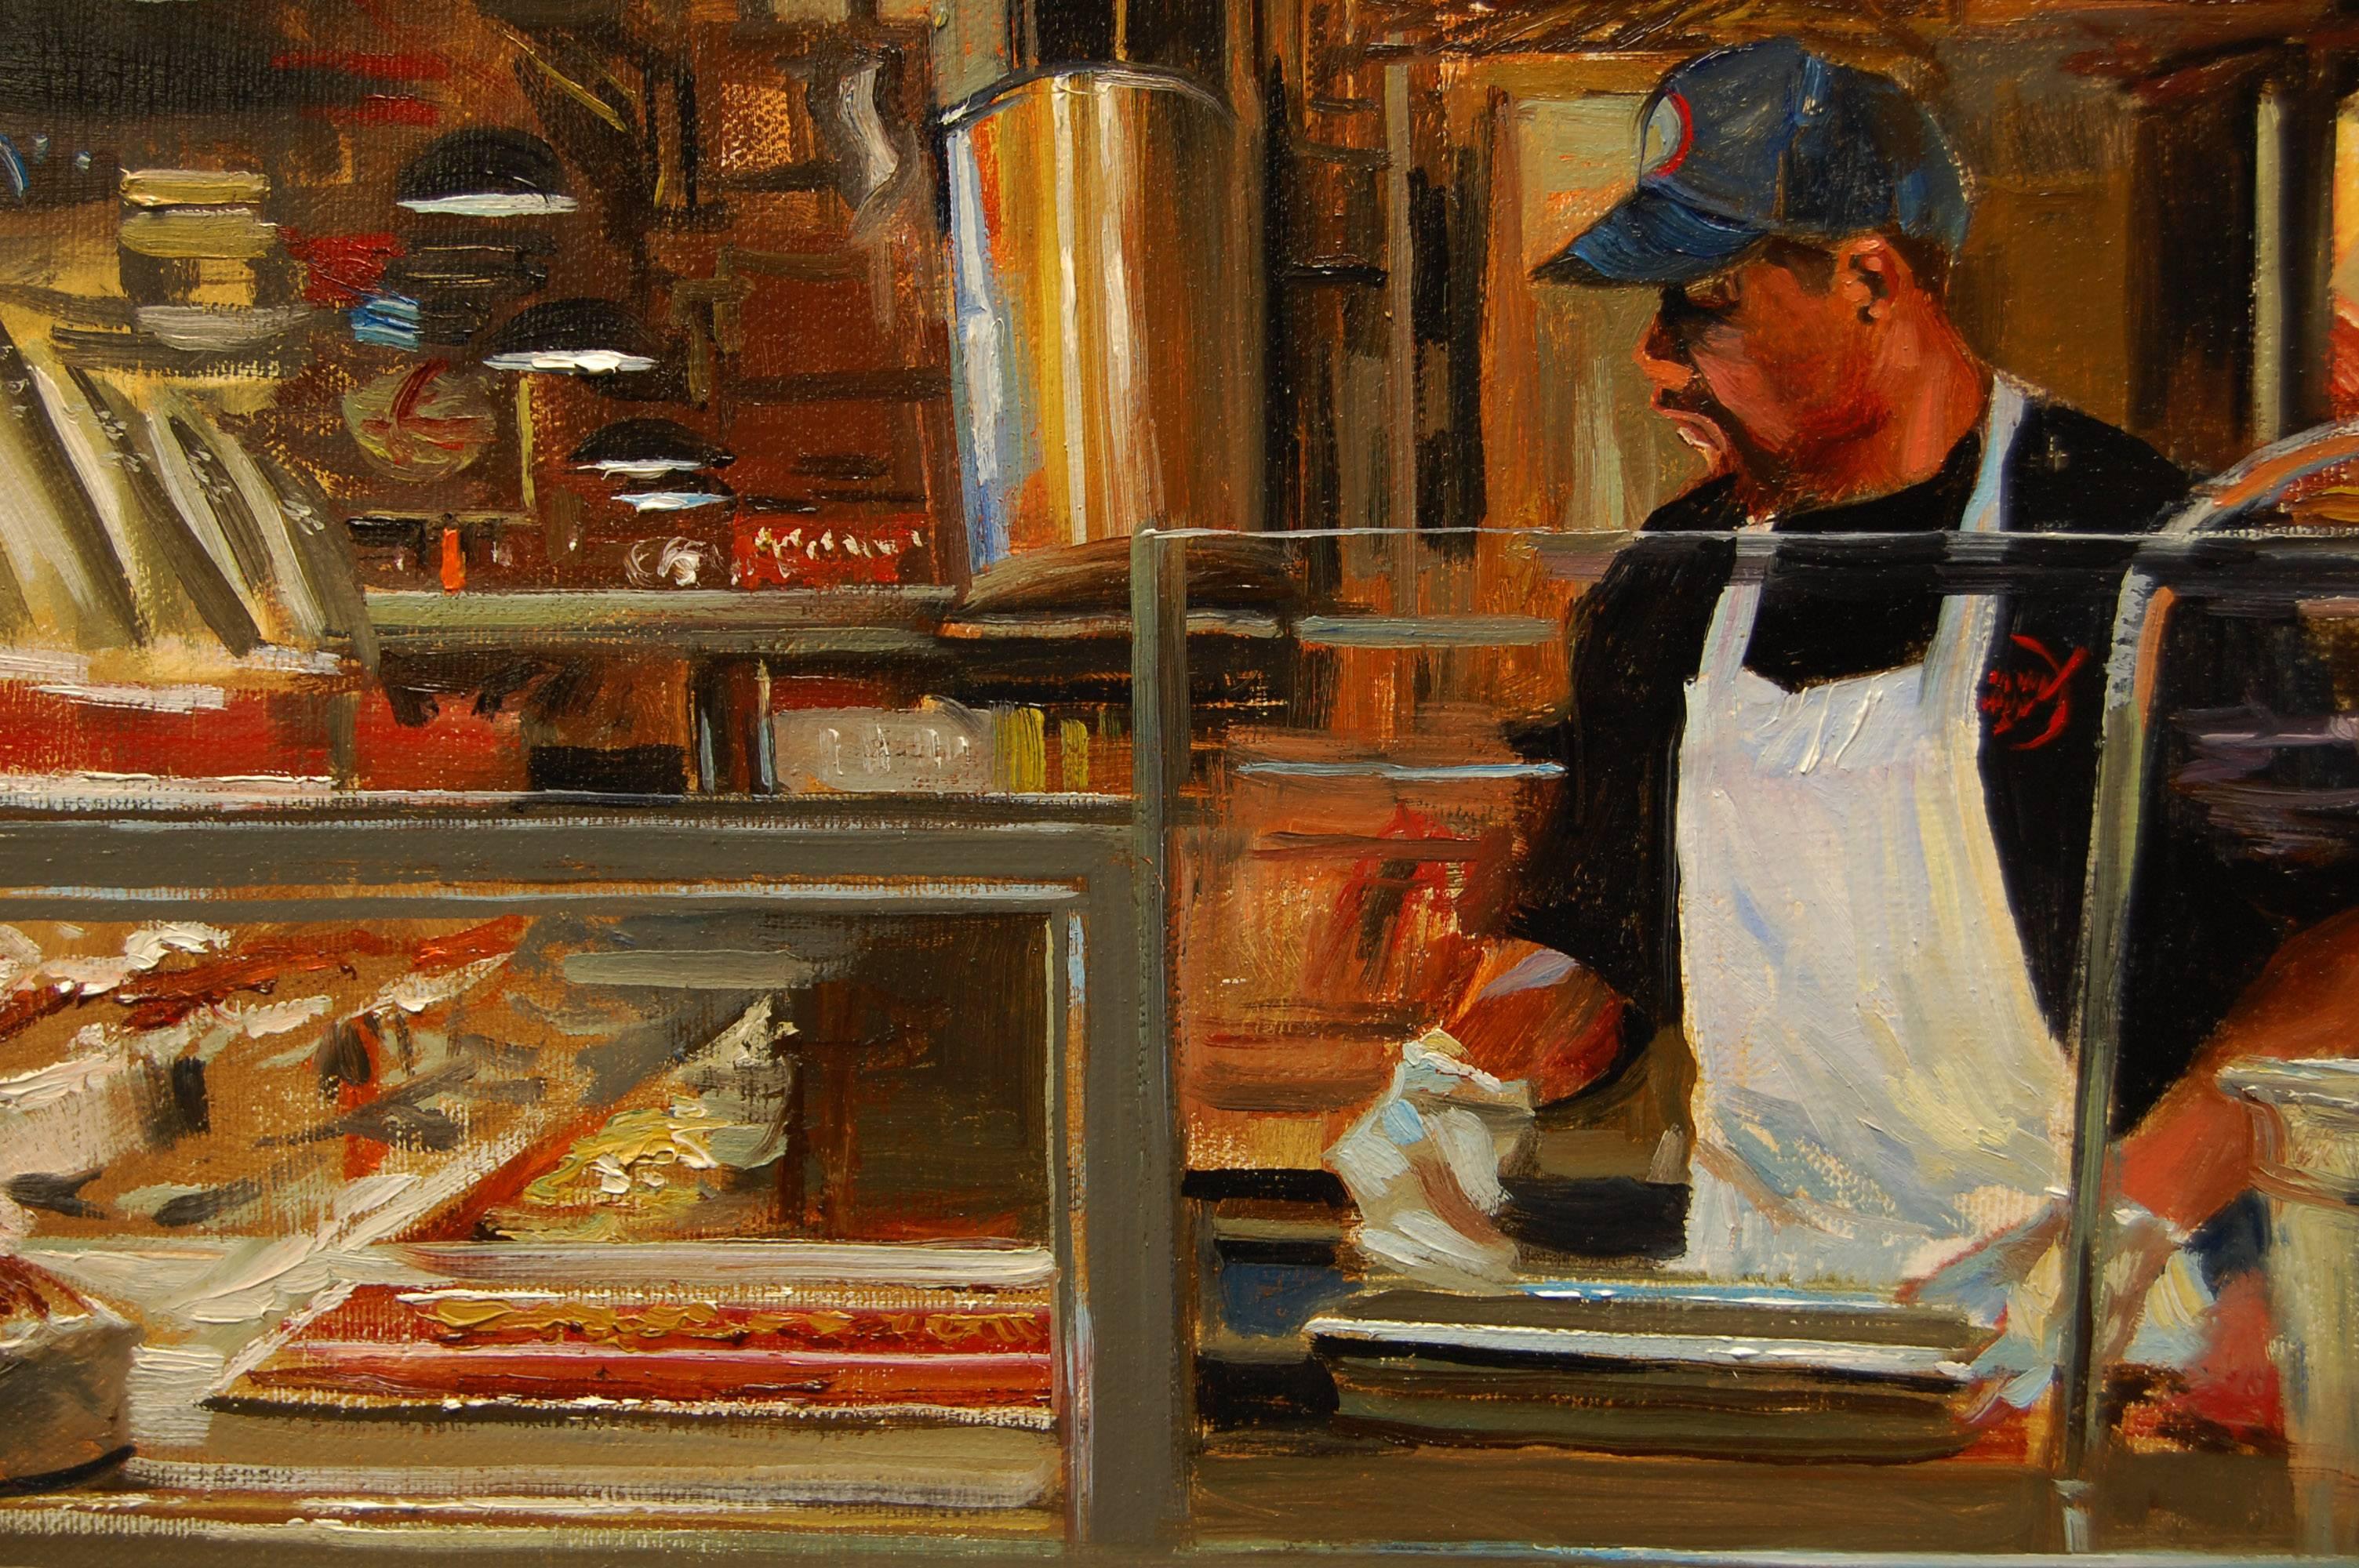 <p>Artist Comments<br>The setting for this painting is one of the venues in the Reading Terminal Market in Philadelphia. I love visiting the market for its eateries, fresh meats, fish and produce that arouse one's appetite. It is also a feast for